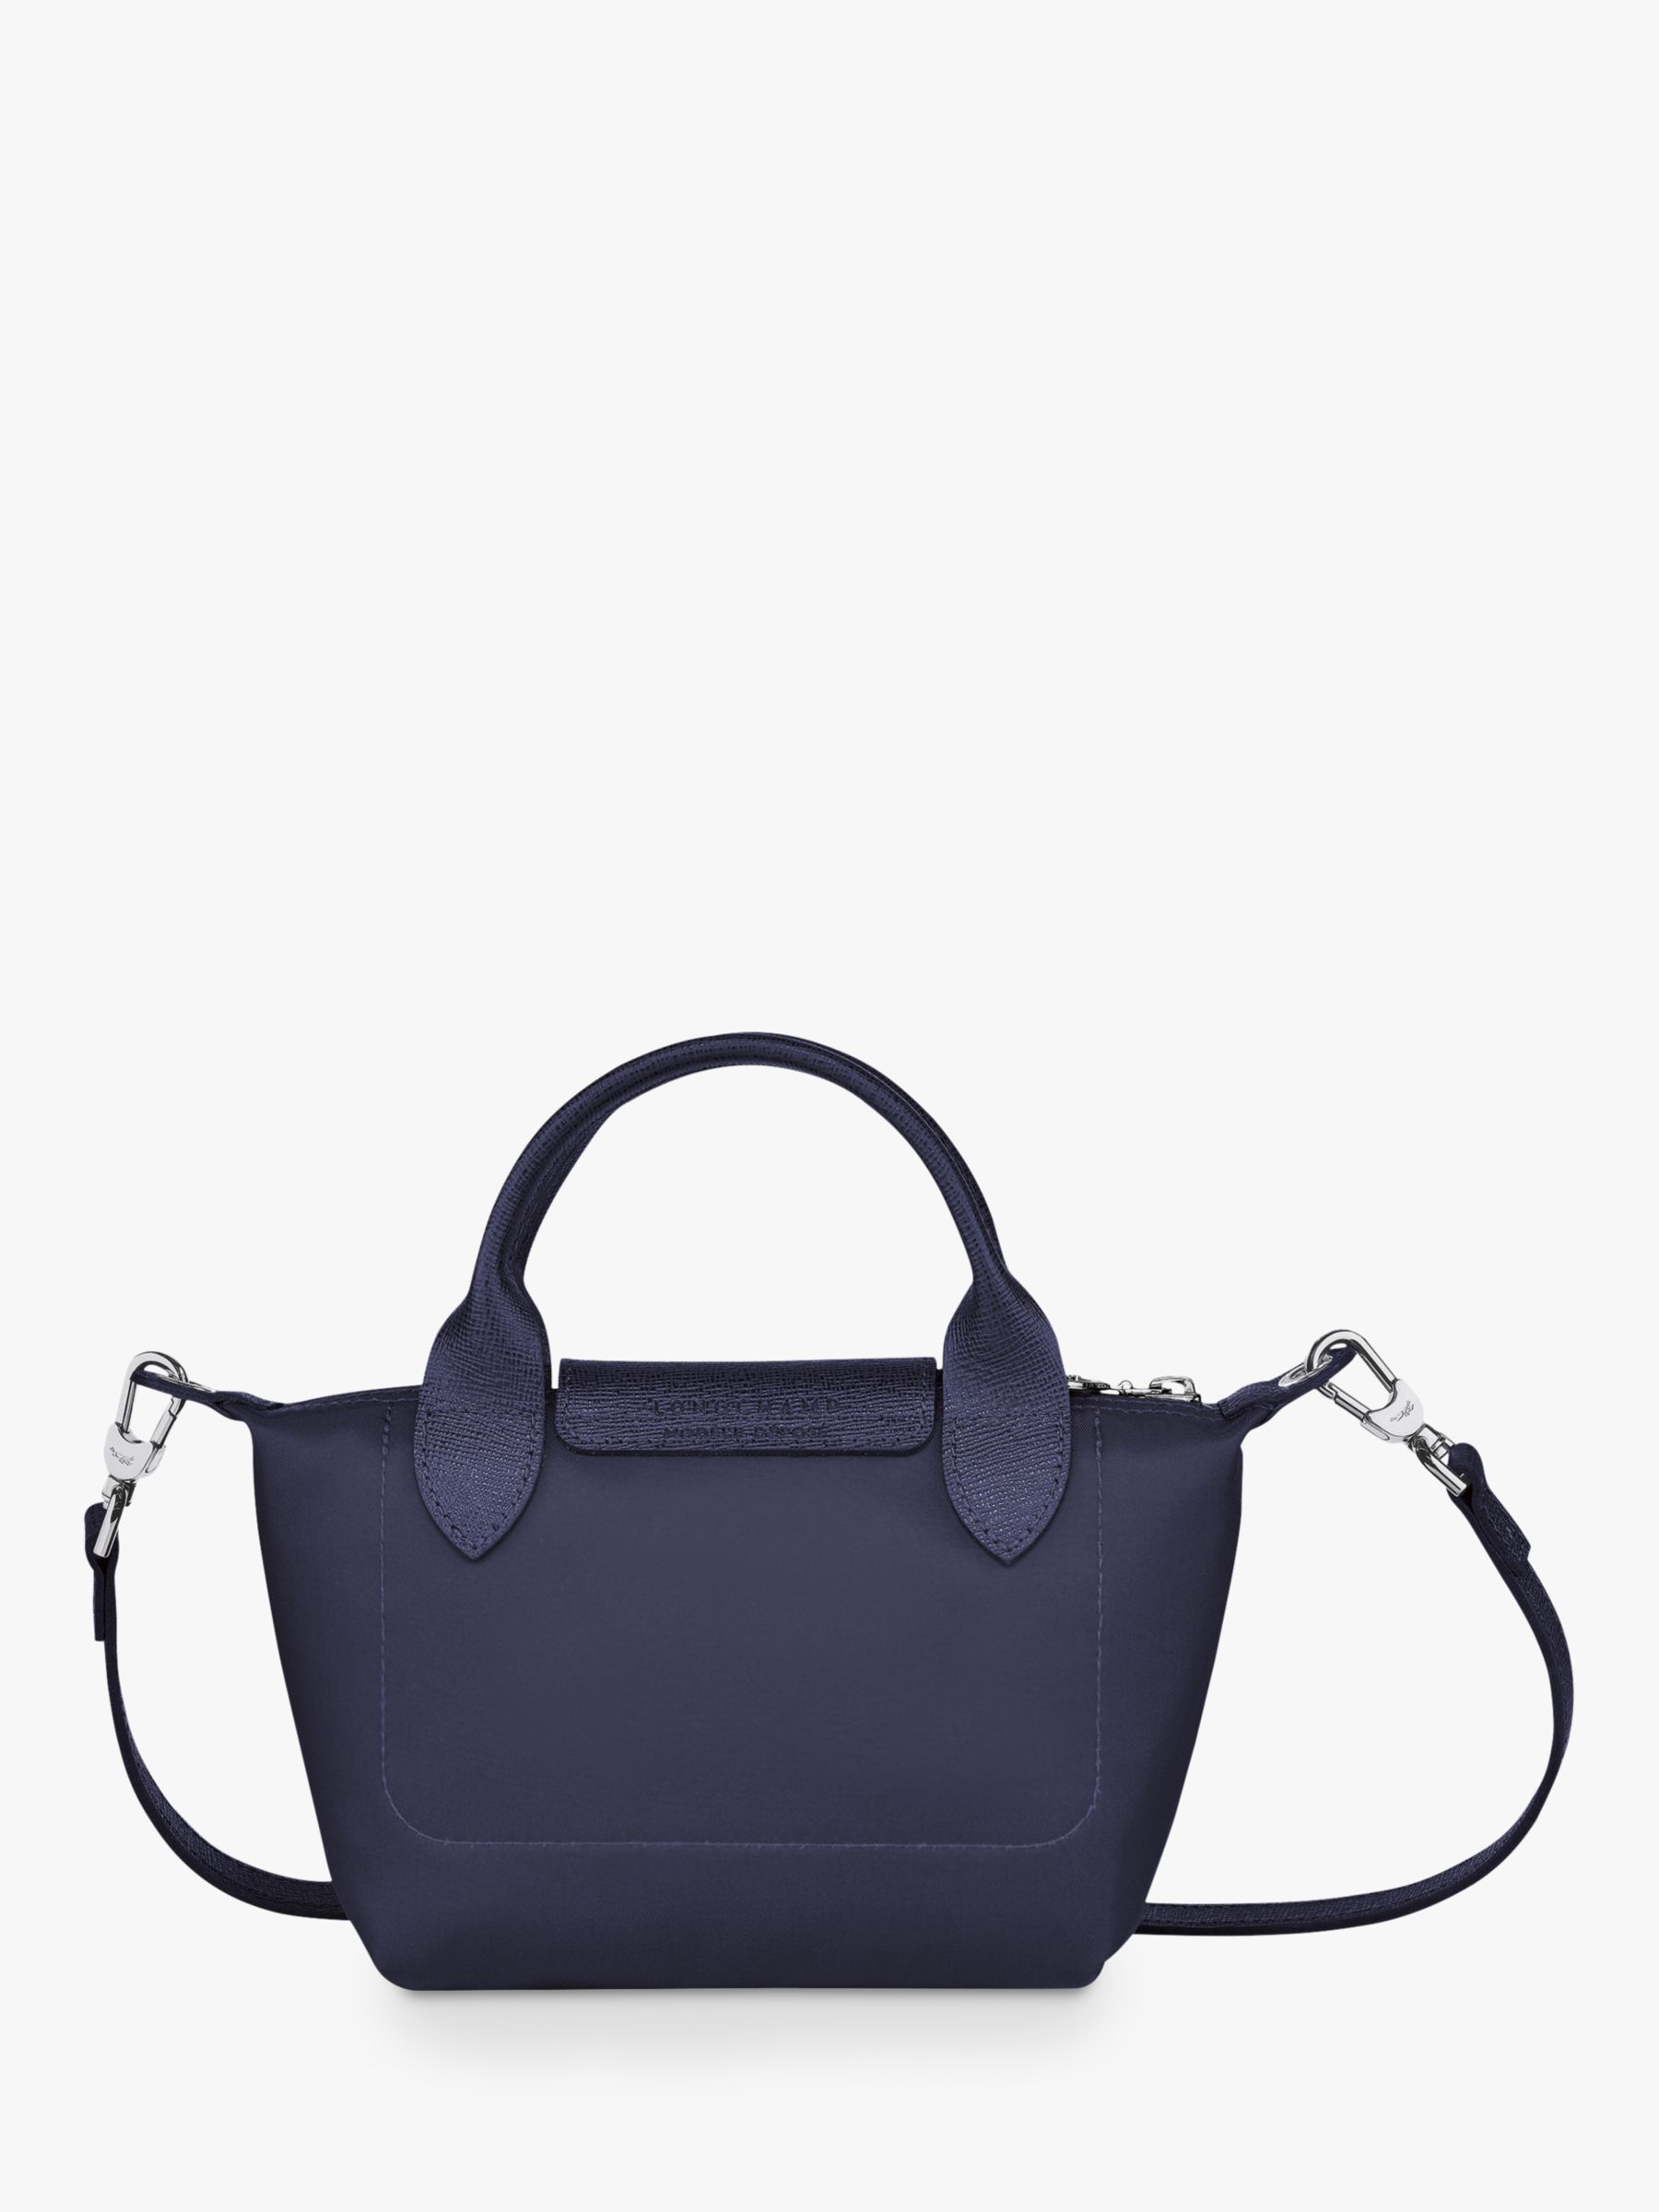 Longchamp Le Pilage Neo Small Bag Review 